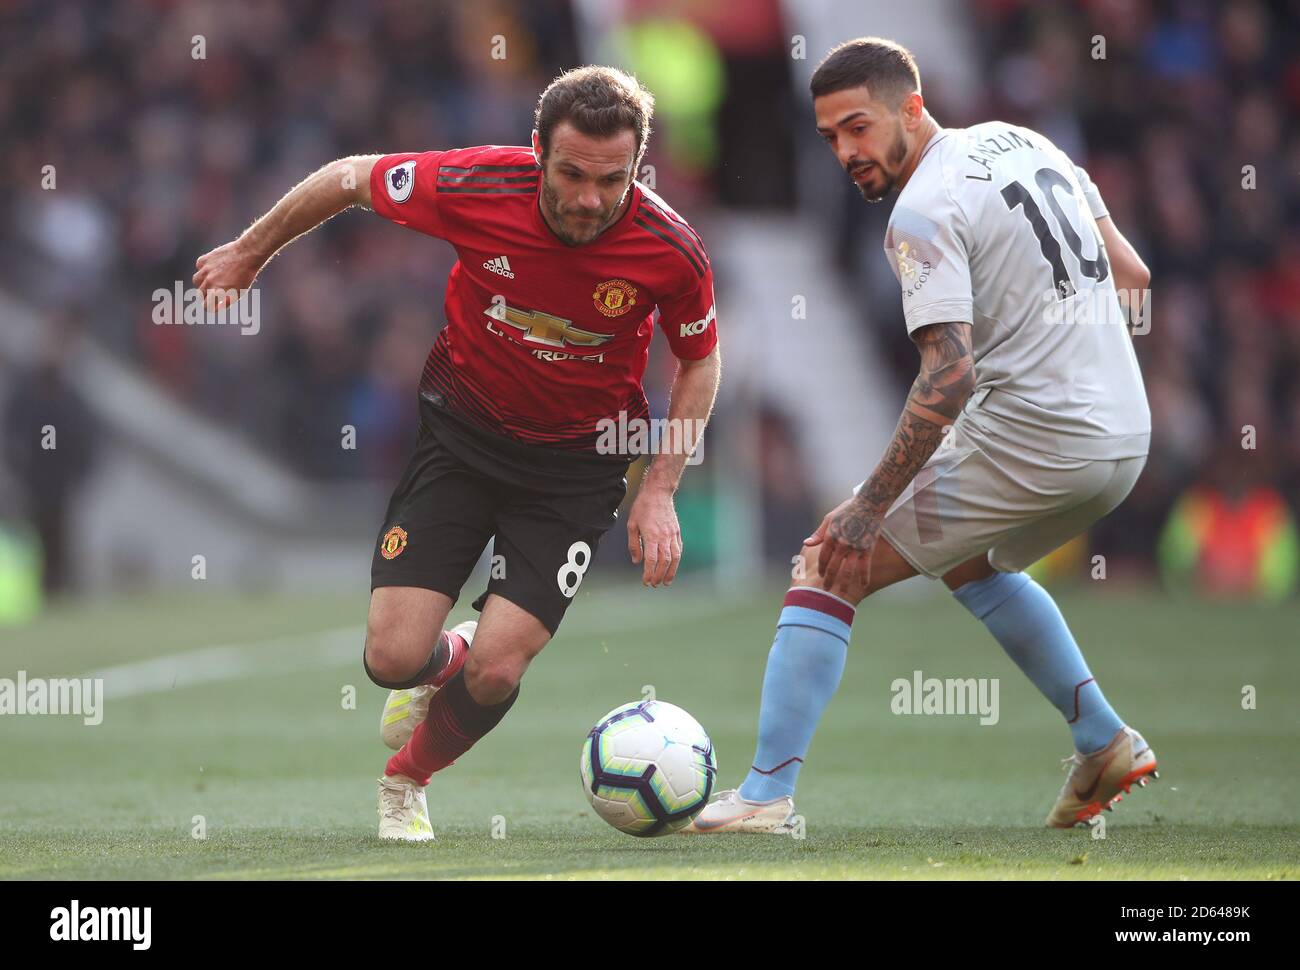 Manchester United's Juan Mata (left) and West Ham United's Manuel Lanzini battle for the ball Stock Photo